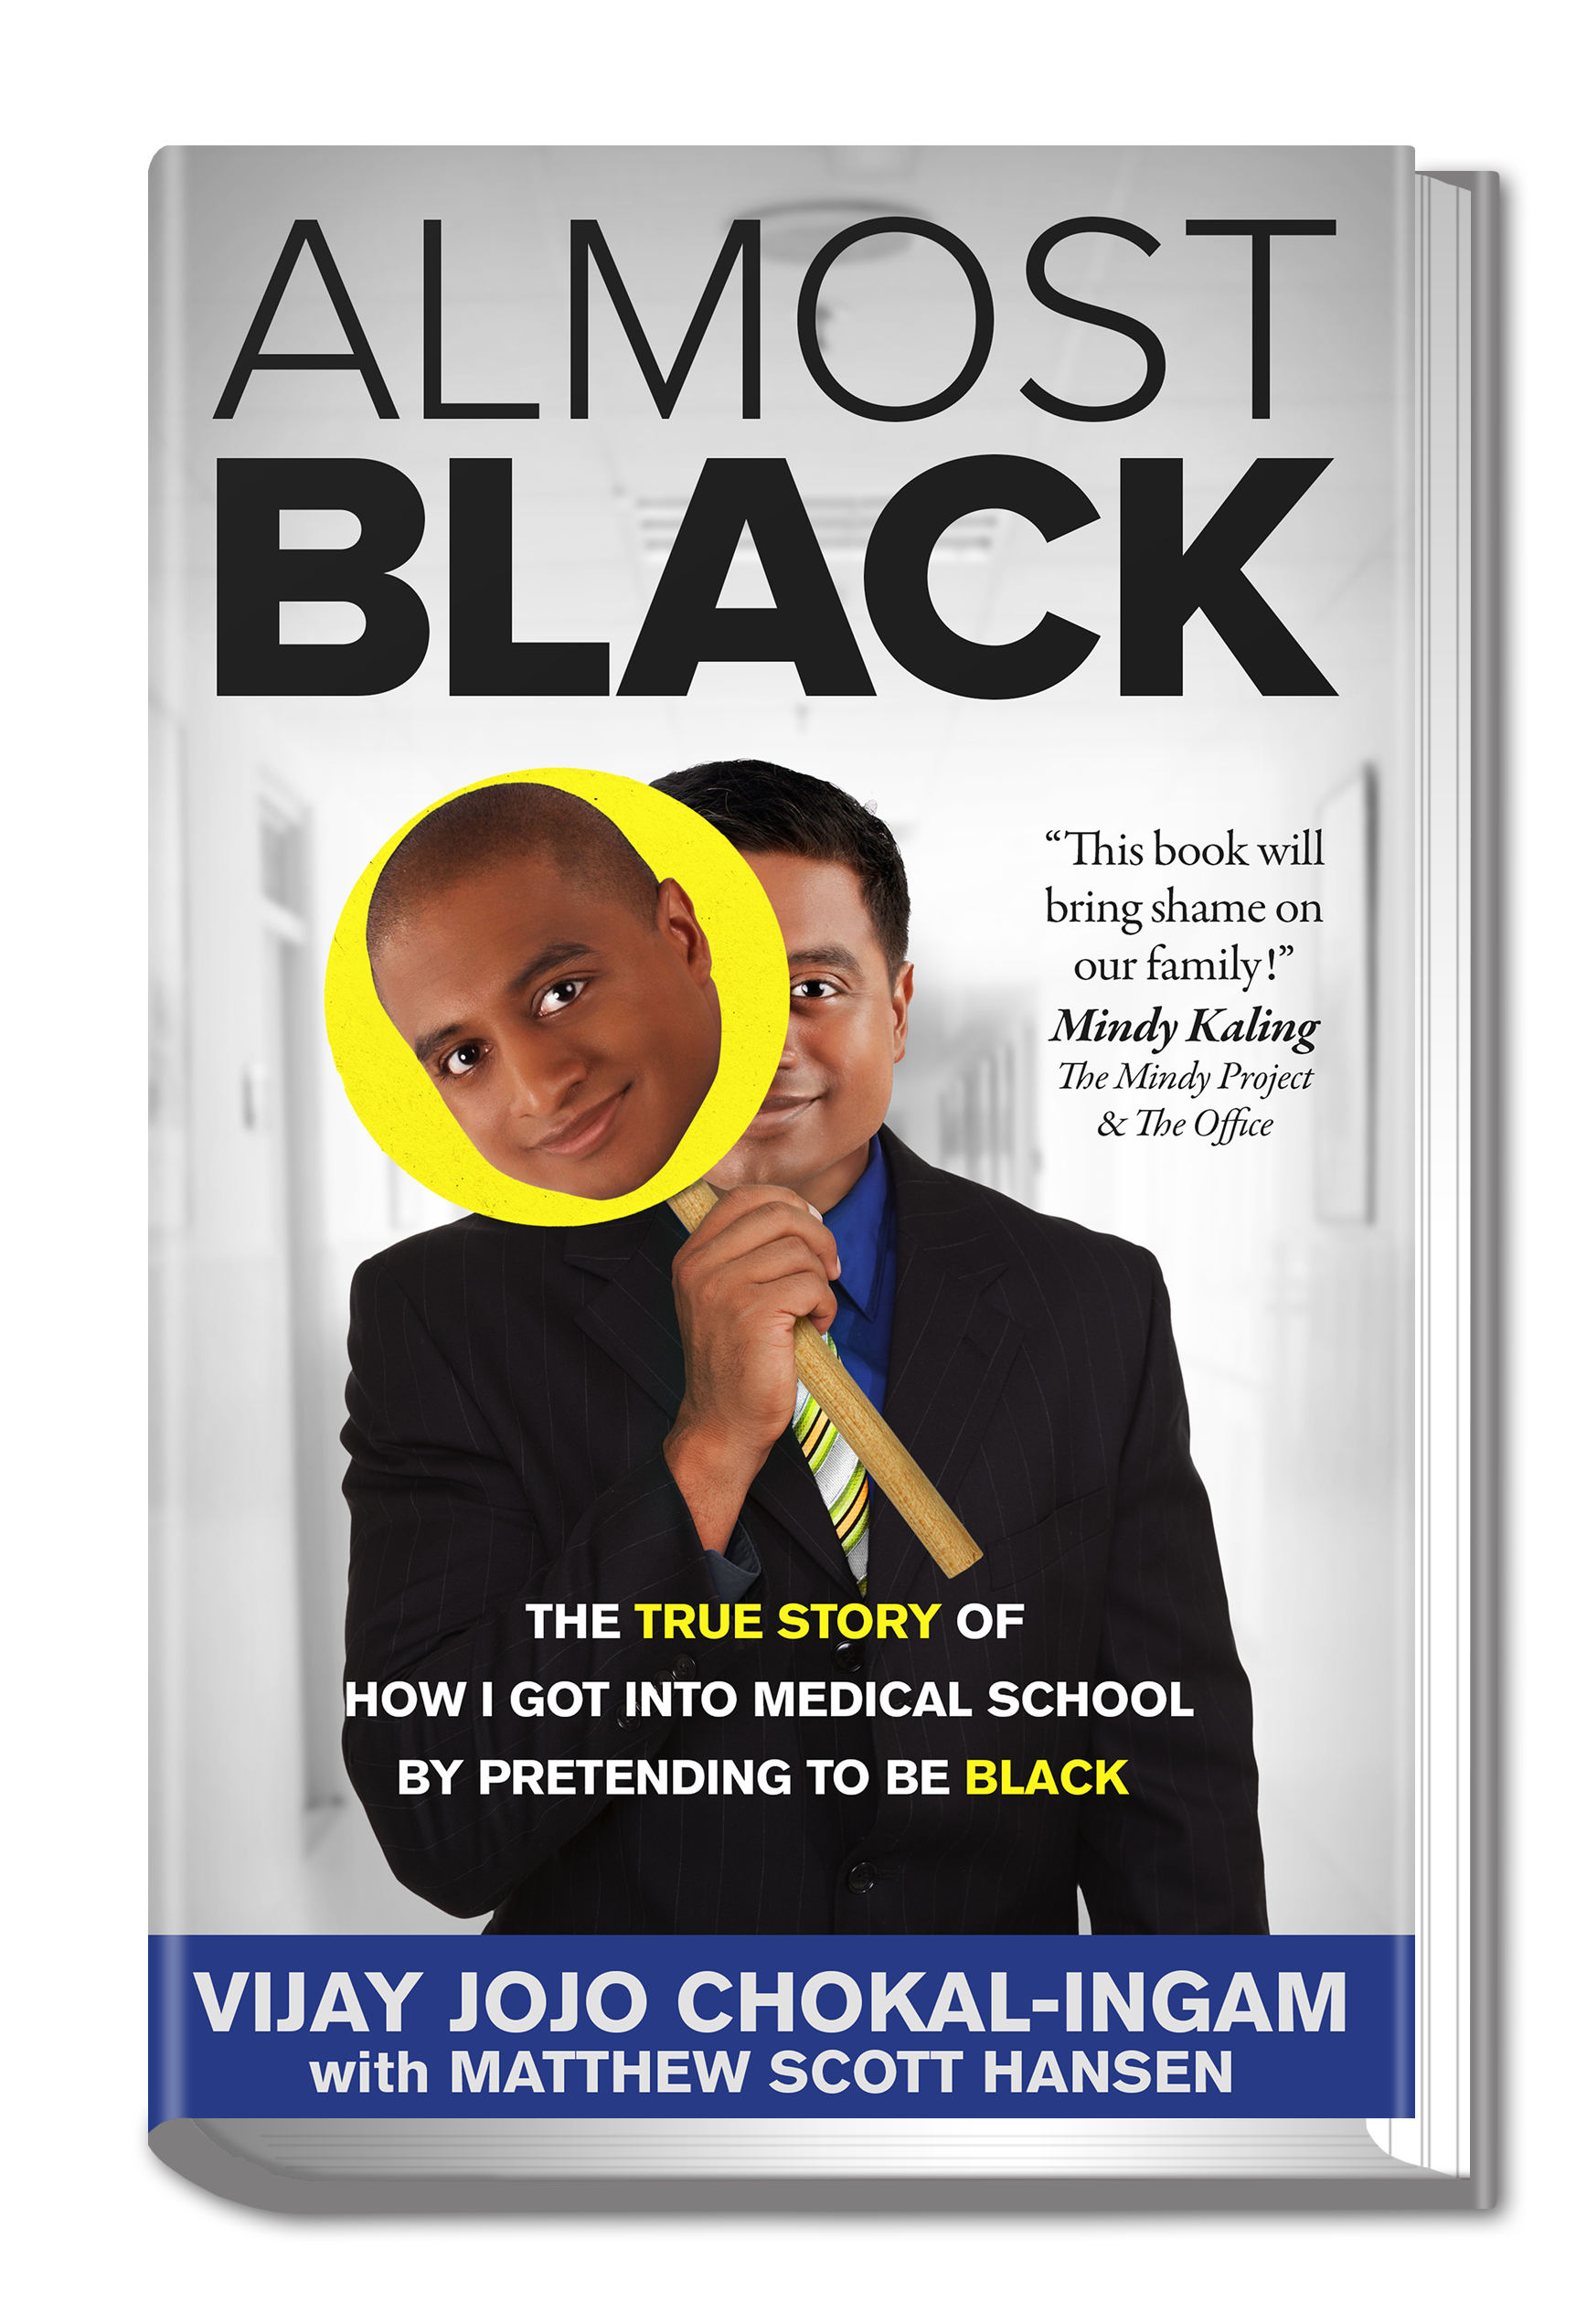 Almost Black Book Cover by Vijay Jojo Chokal=Ingam, brother of Mindy Kaling of the MIndy Project